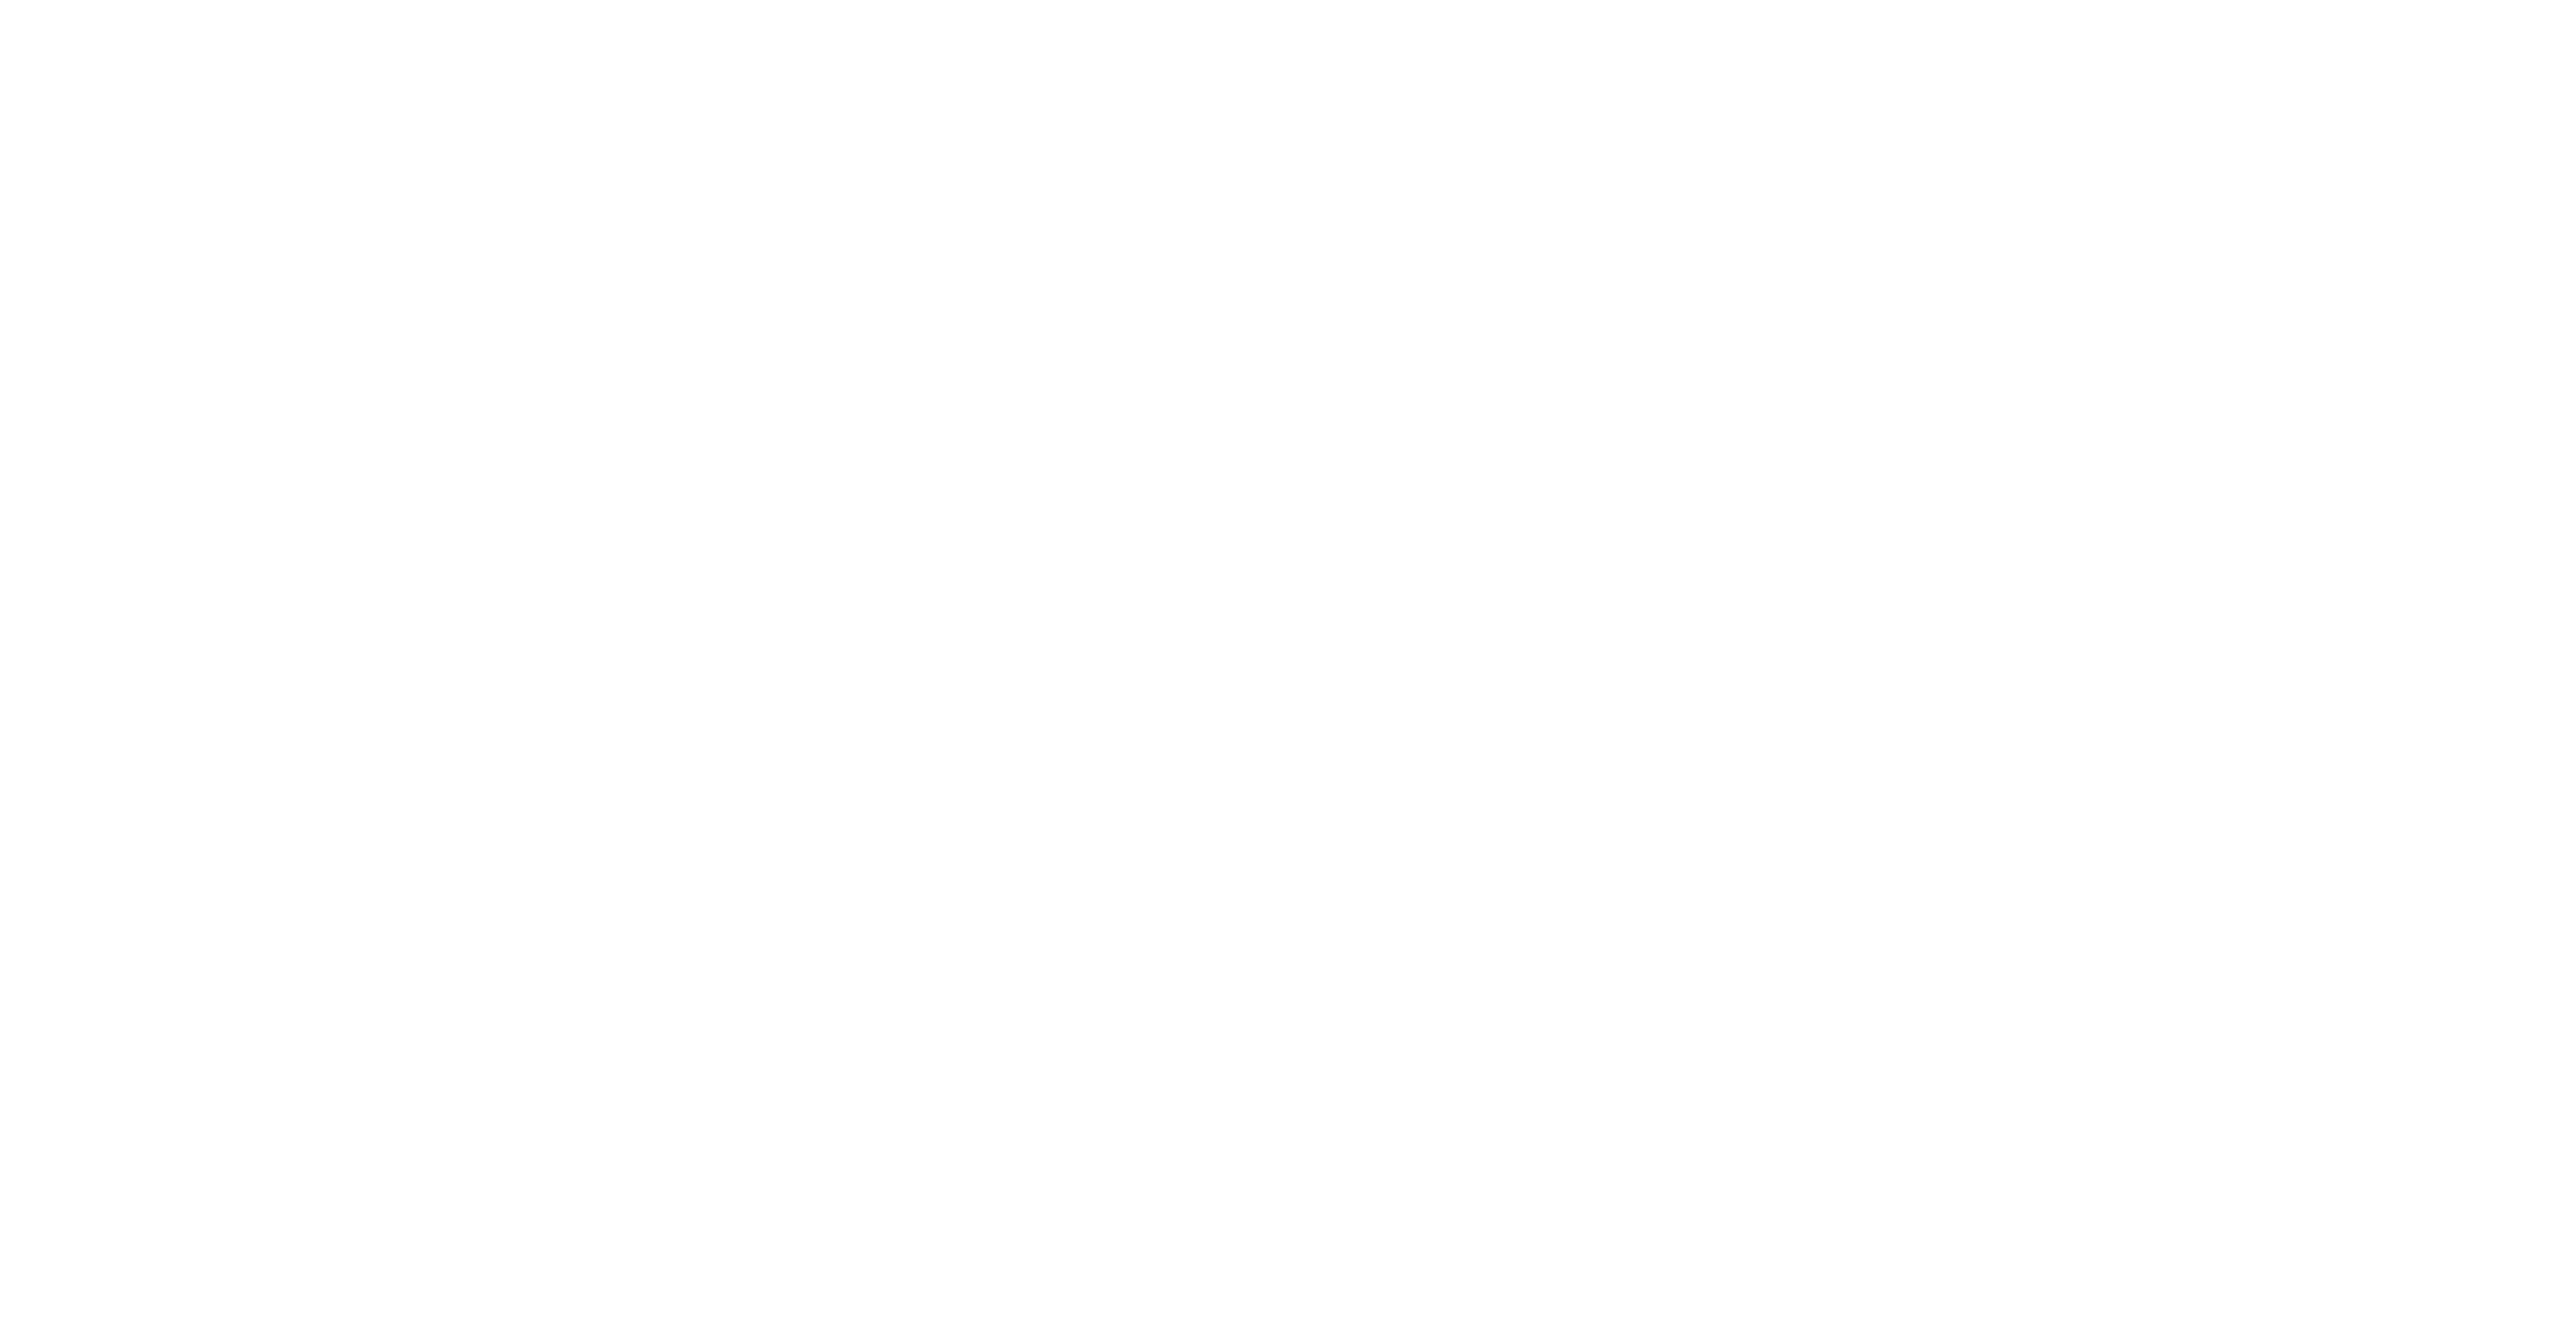 Caspian Fish and Seafood